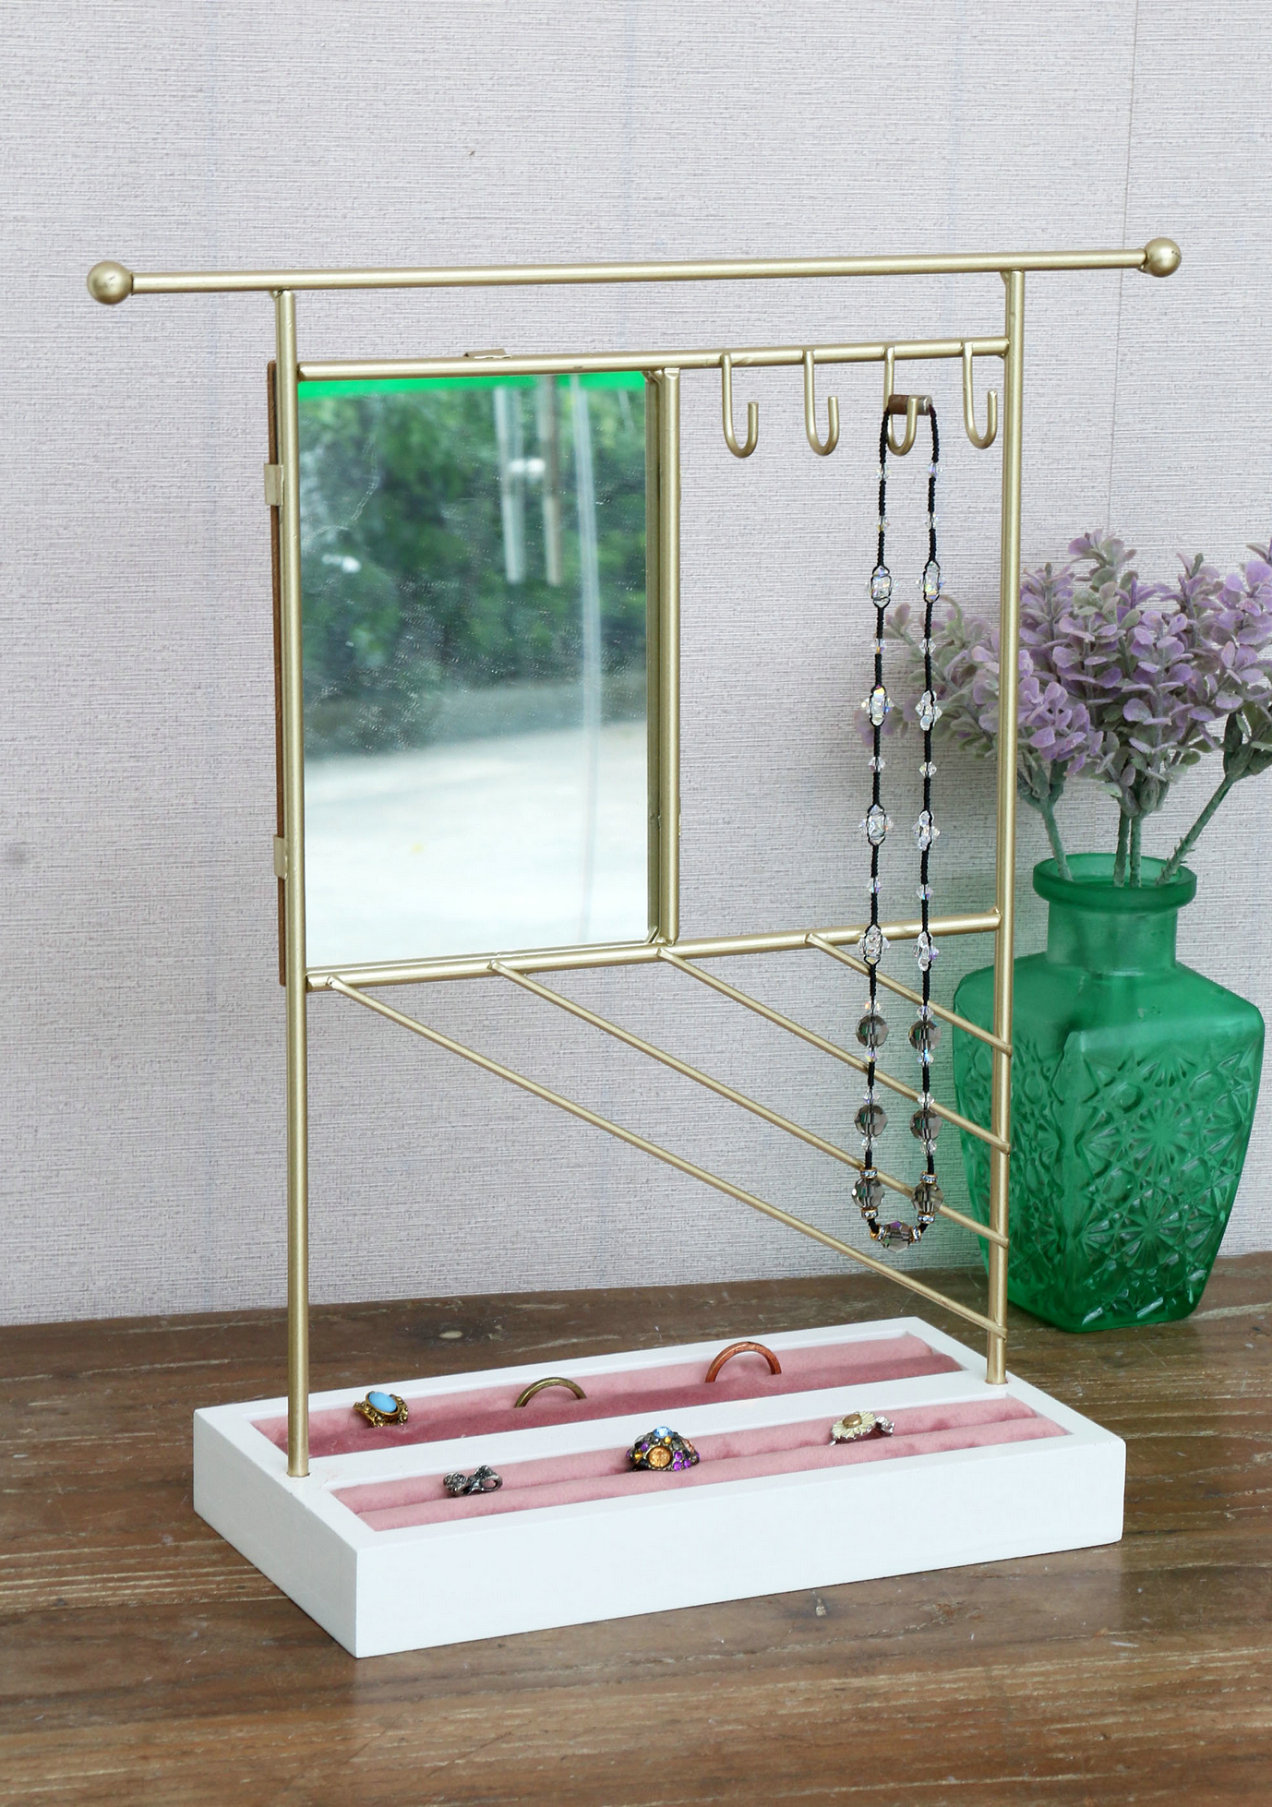 FU-23520  Wooden base jewellry holder with rectangle mirror   20x10.5x34.